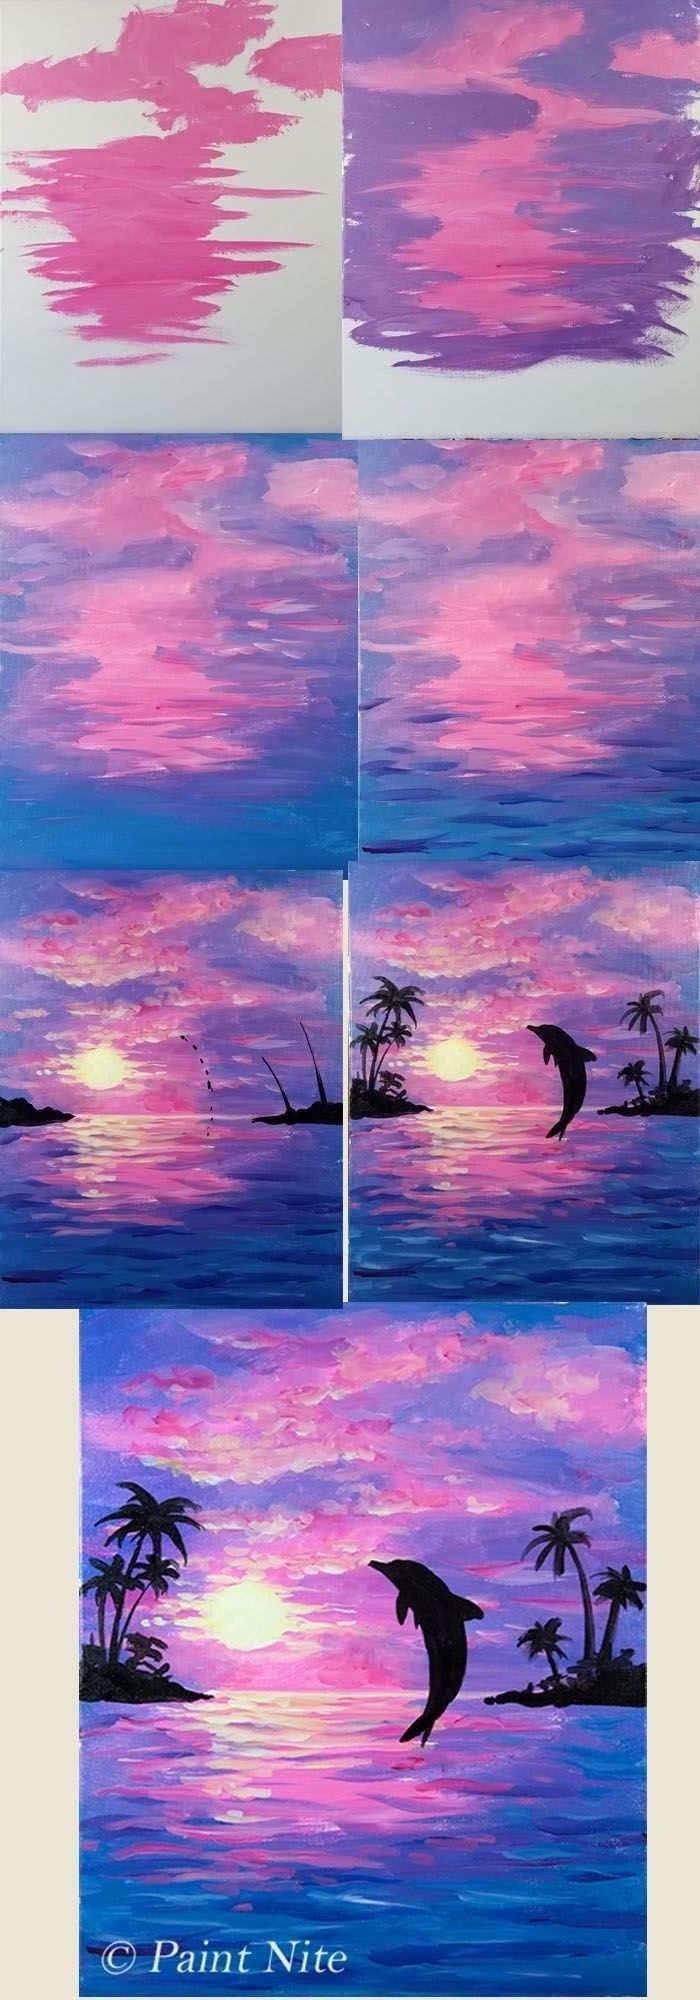 Sunset Painting Ideas Step By Step